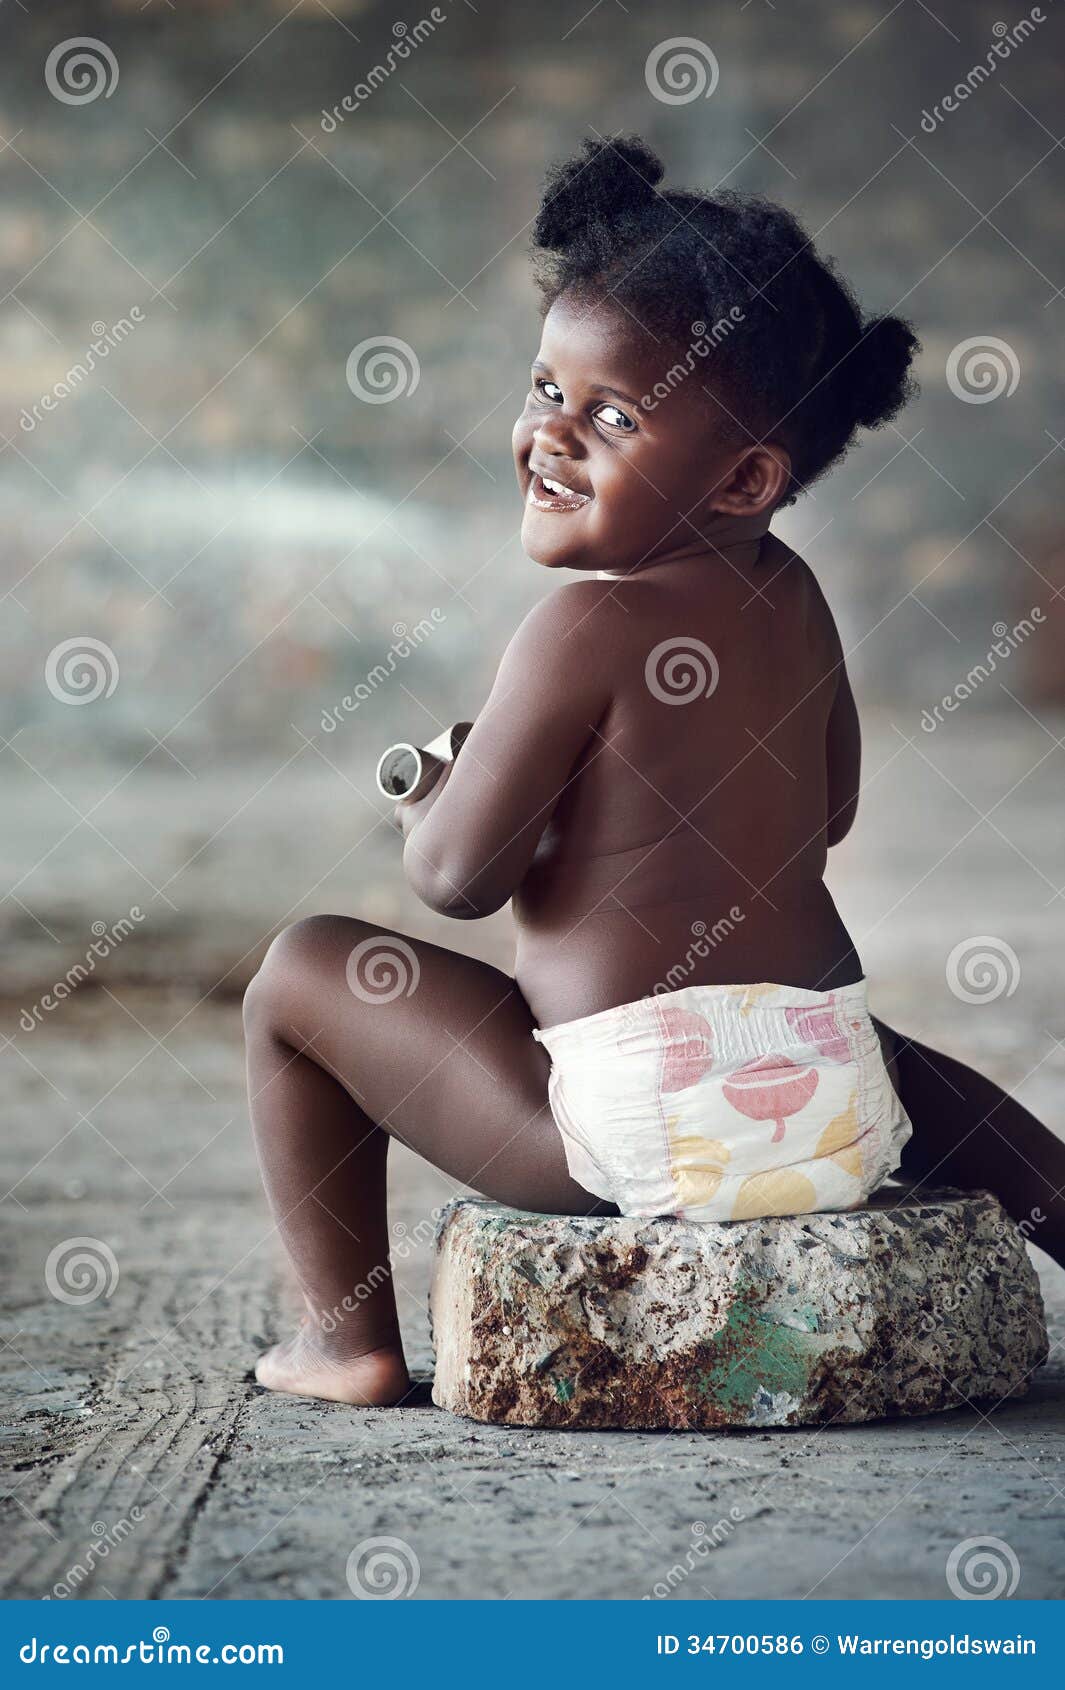 Real african baby stock photo. Image of happy, laugh - 34700586